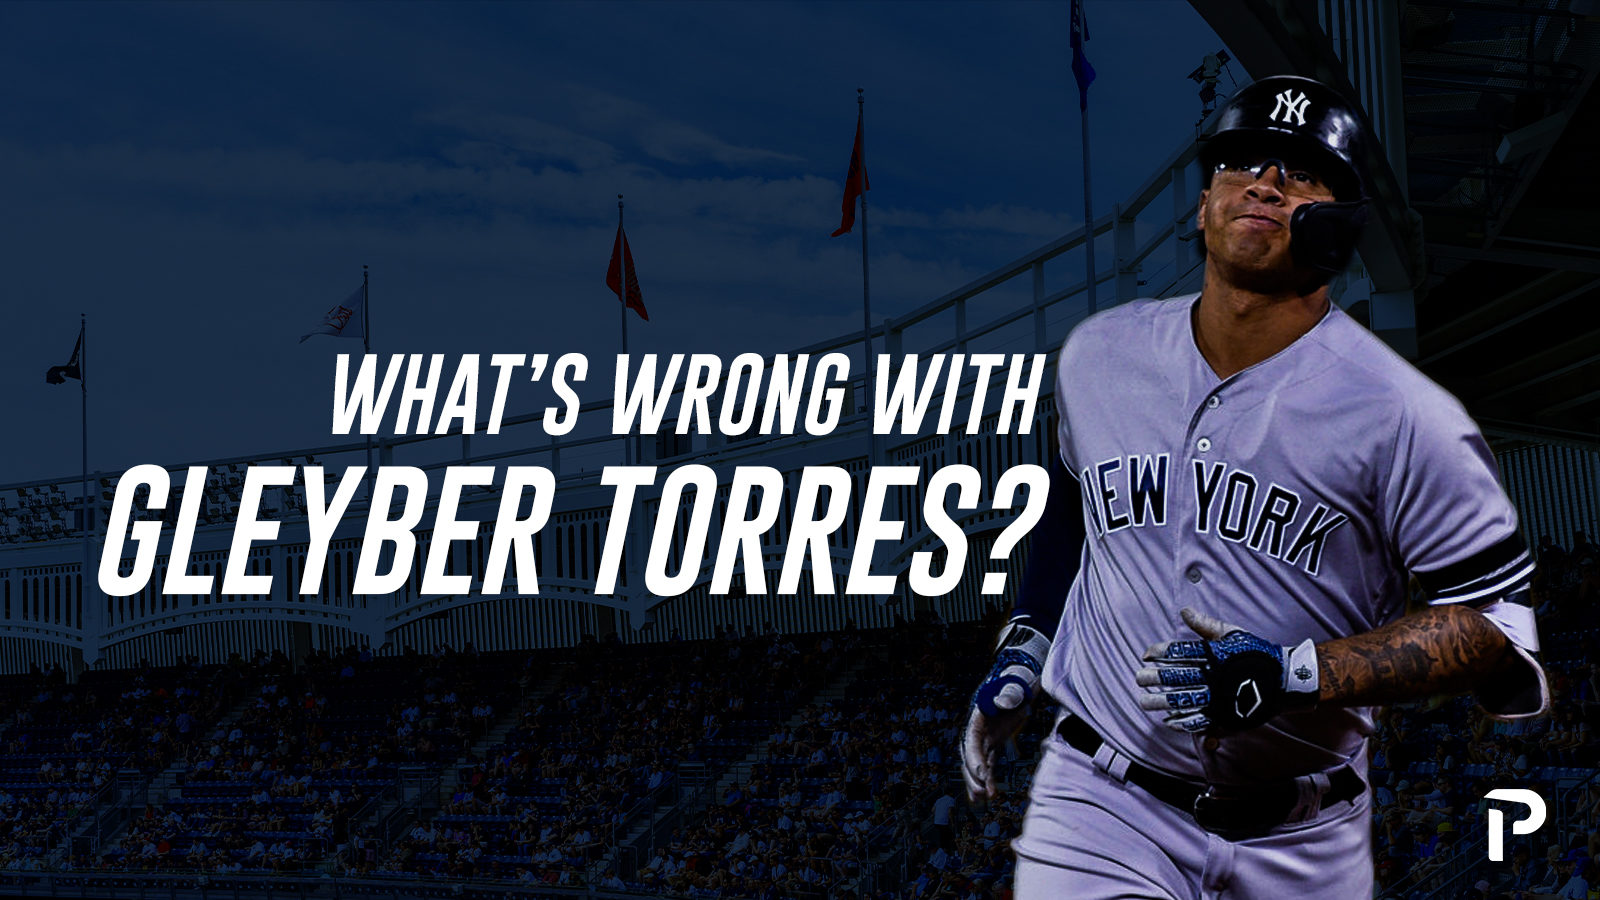 Gleyber Torres' Bold Act Captivates Fans, But Sparks Worries